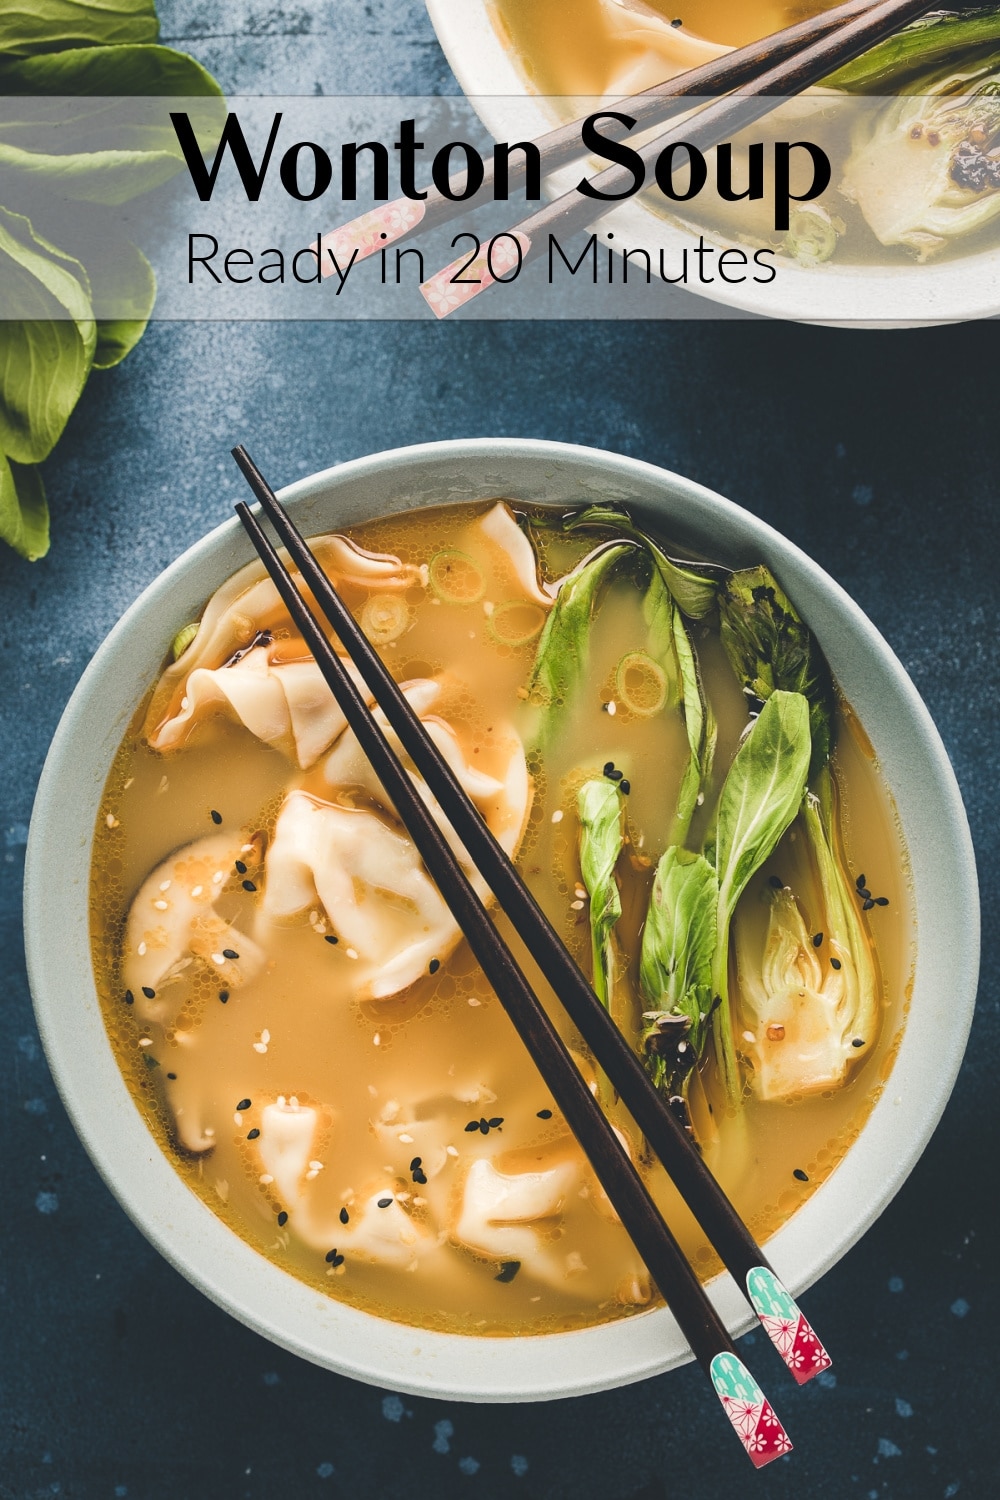 This quick and easy Wonton Soup is like a hug in a bowl. The base flavor of the broth adds heat and warmth to this classic Asian dish. The wonton pillows are cooked to tender perfection, while the bok choy adds color and texture. When you're craving takeout, this recipe is simple to recreate at home in twenty minutes. via @cmpollak1